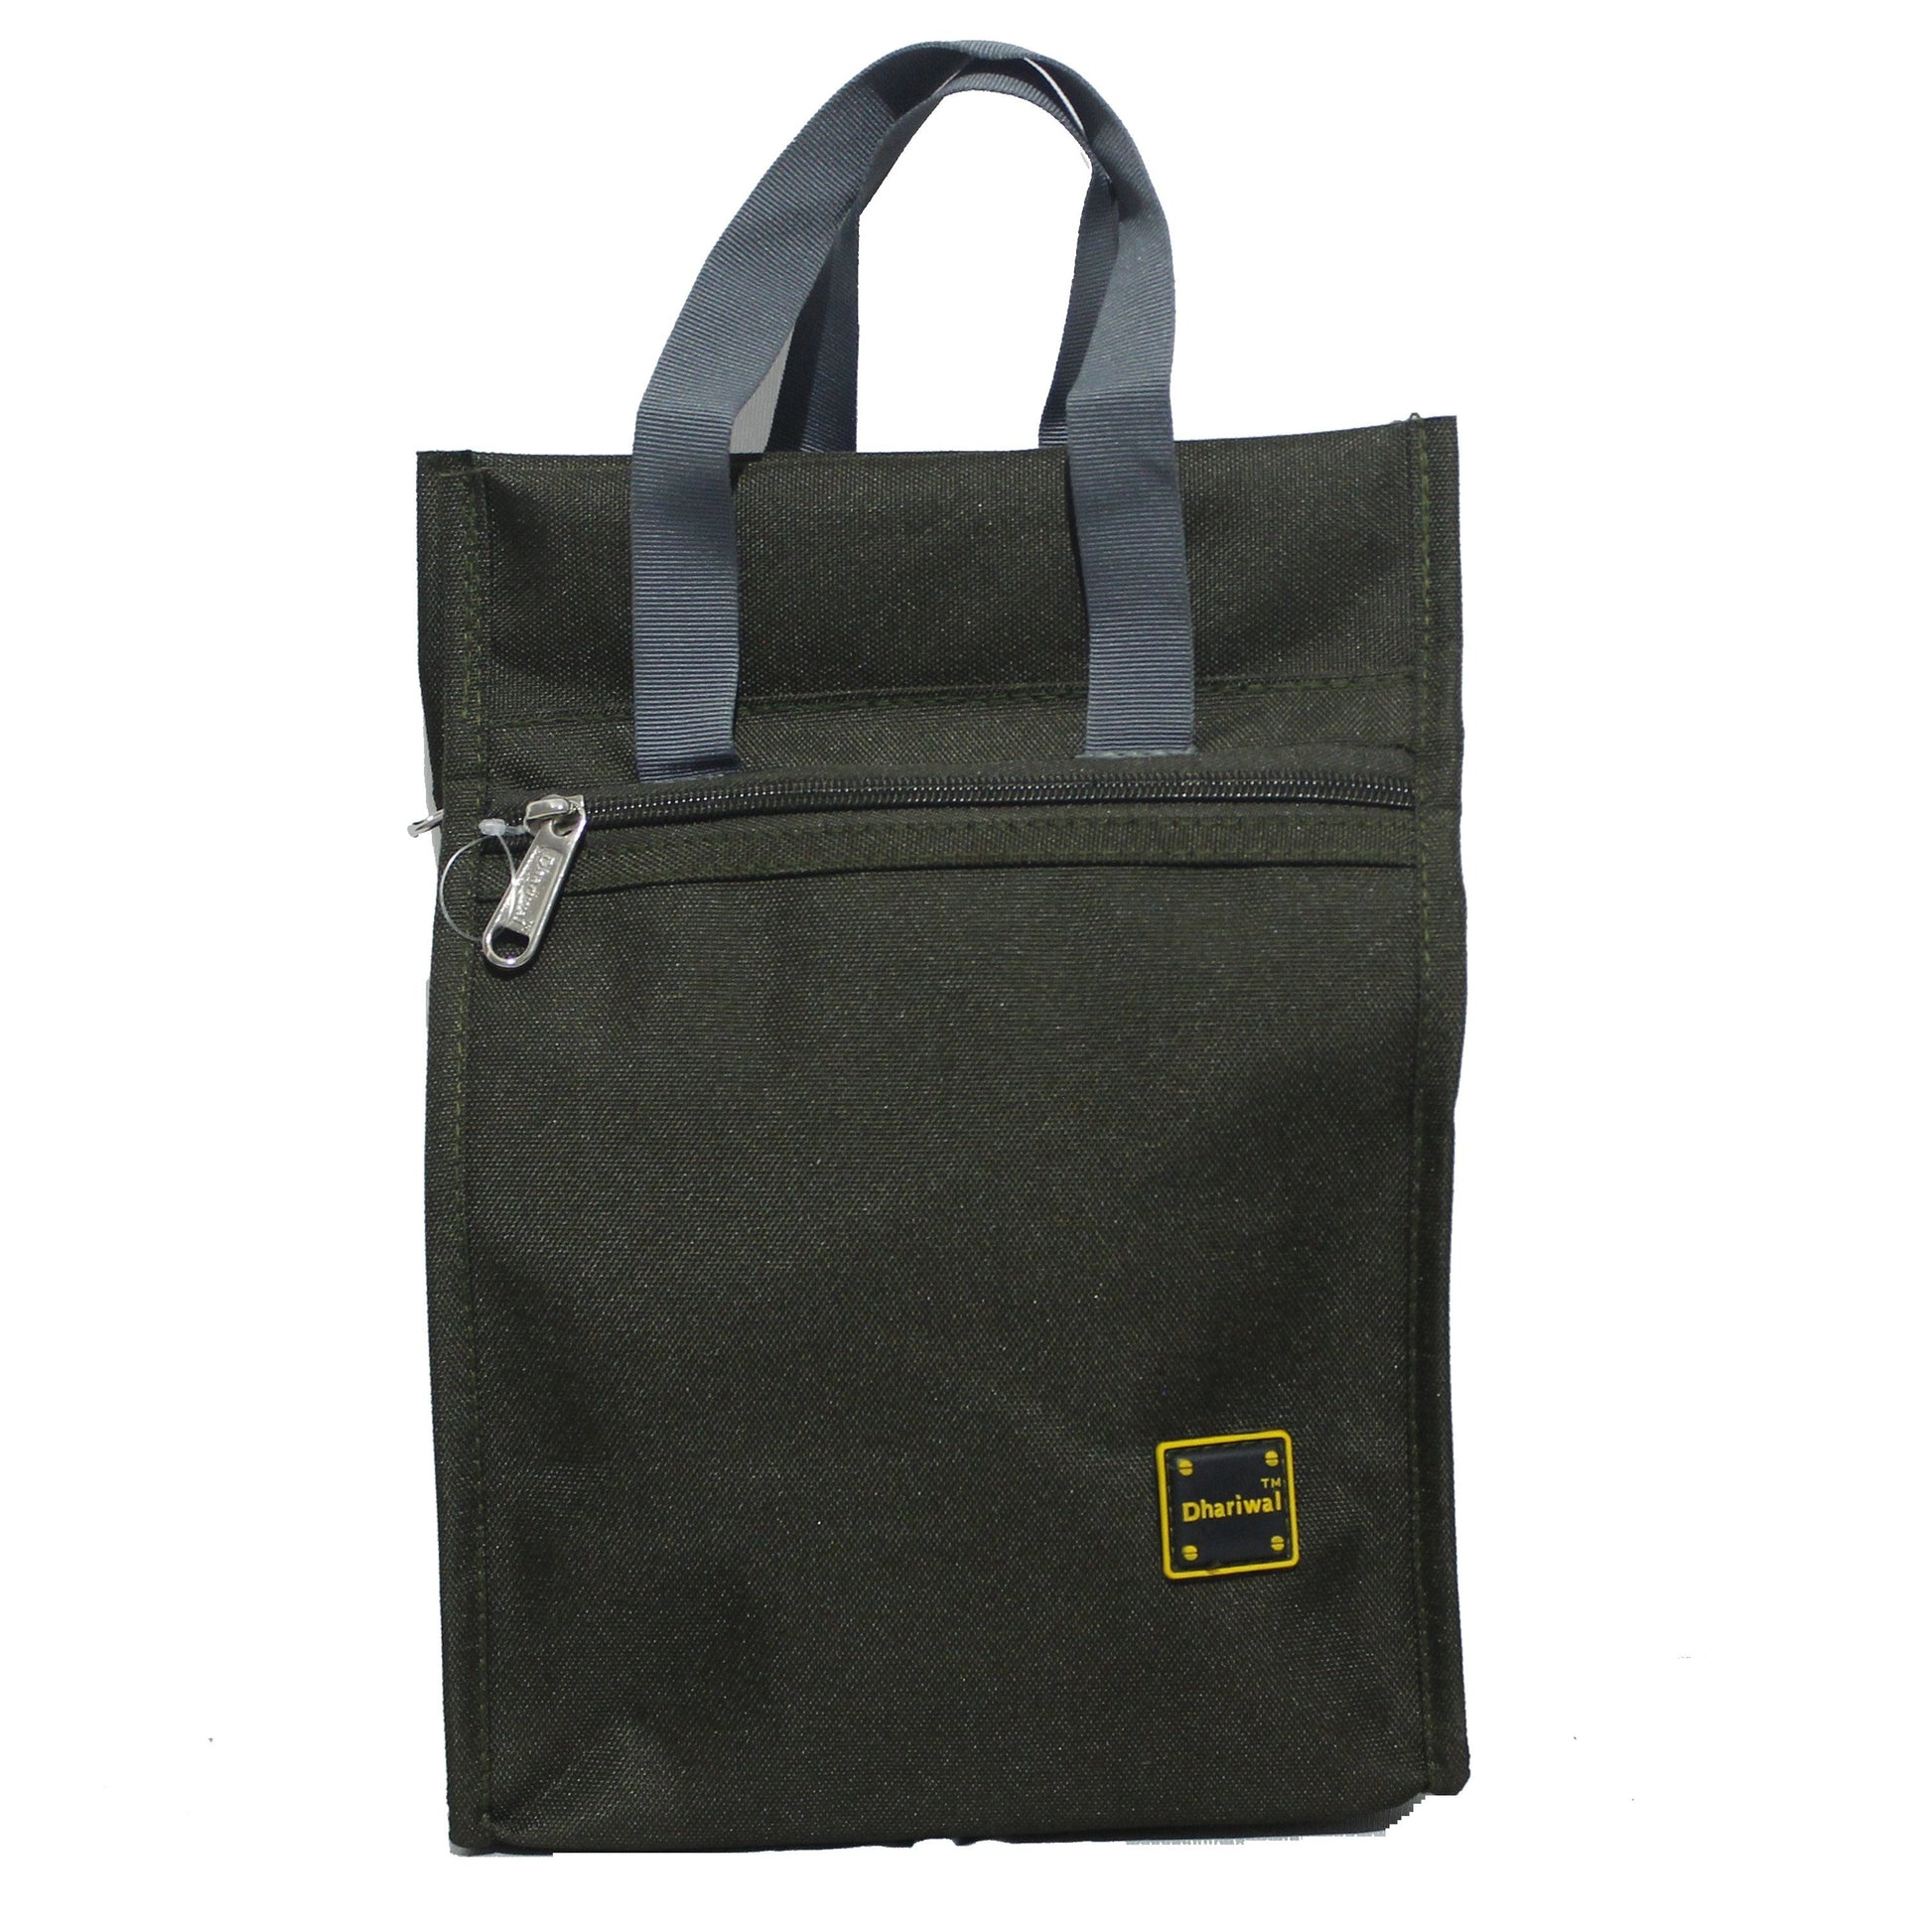 Thaili No.3 Tiffin Bag 13in x 9in x 6in TB-402 - Small Tiffin Bags Dhariwal Green 